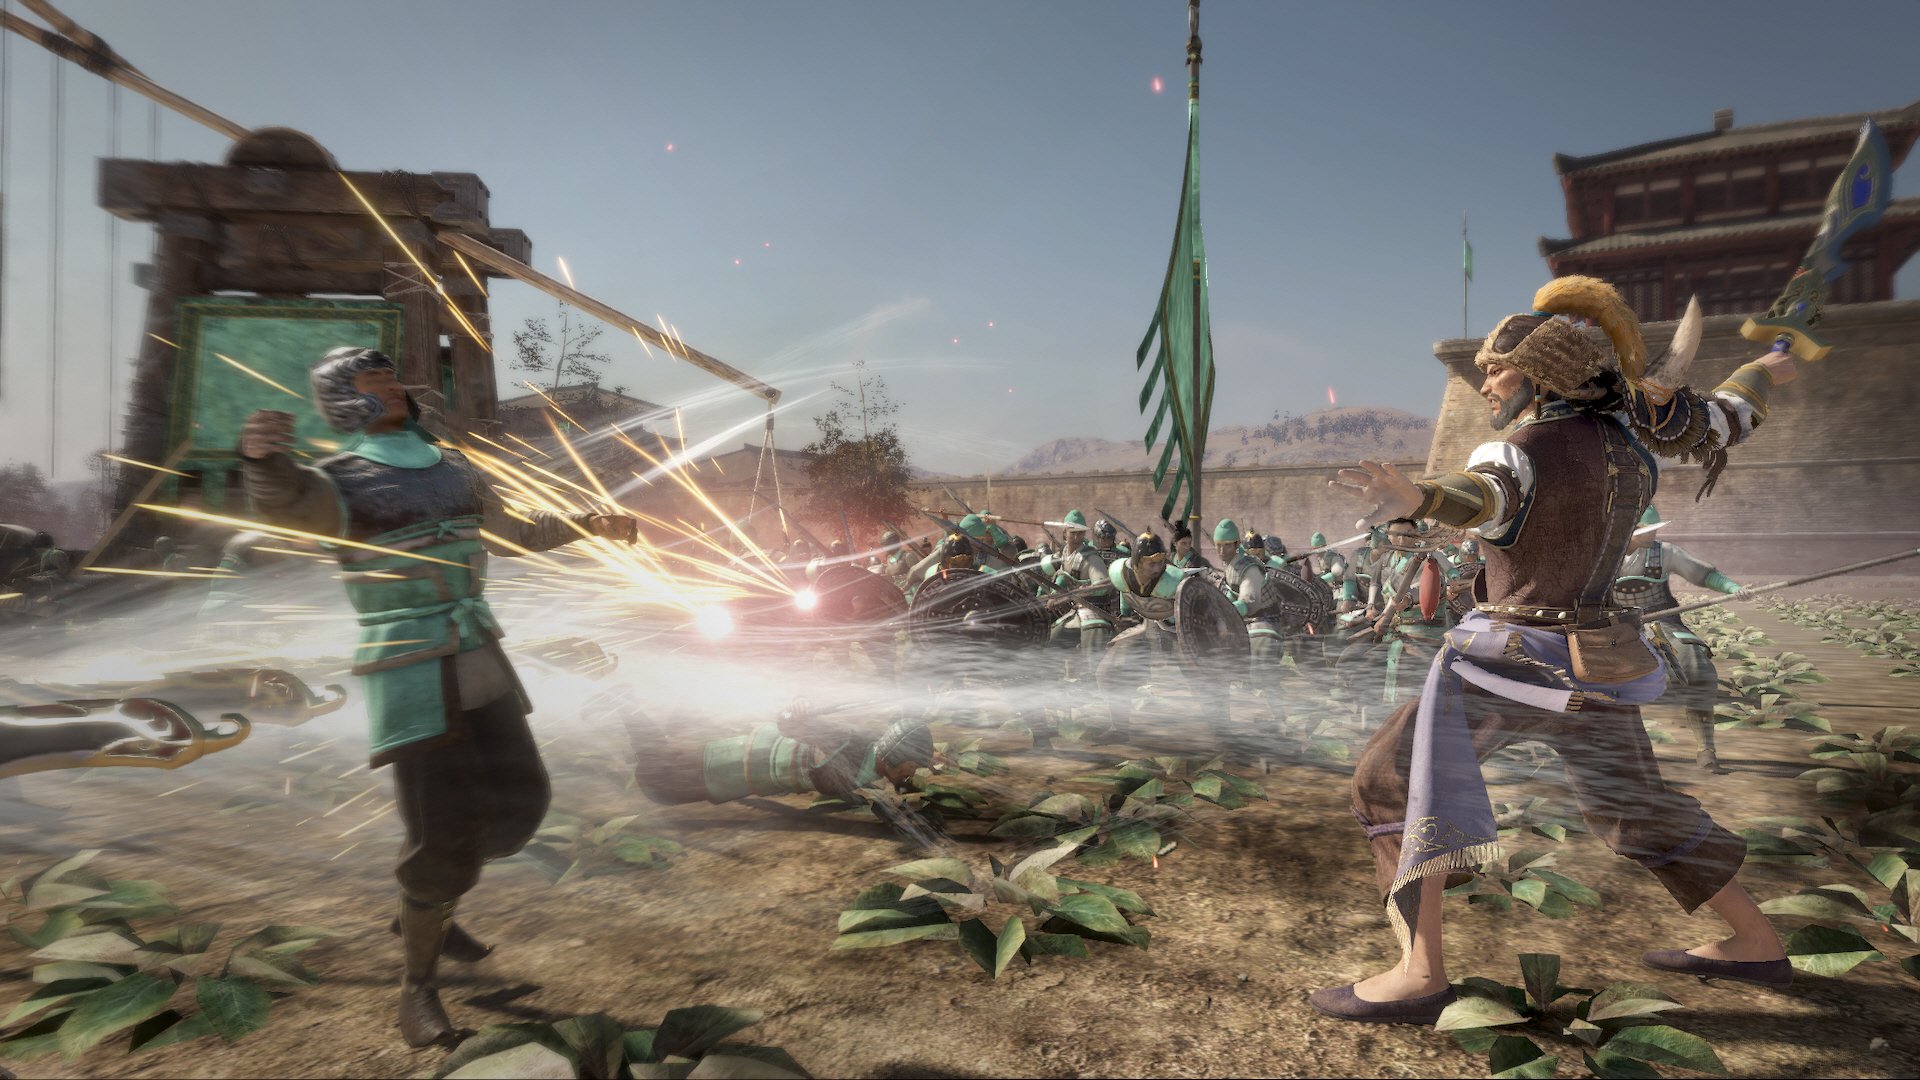 Create Your Own Warlord In Dynasty Warriors 9 Empires - Plato Data Intelligence